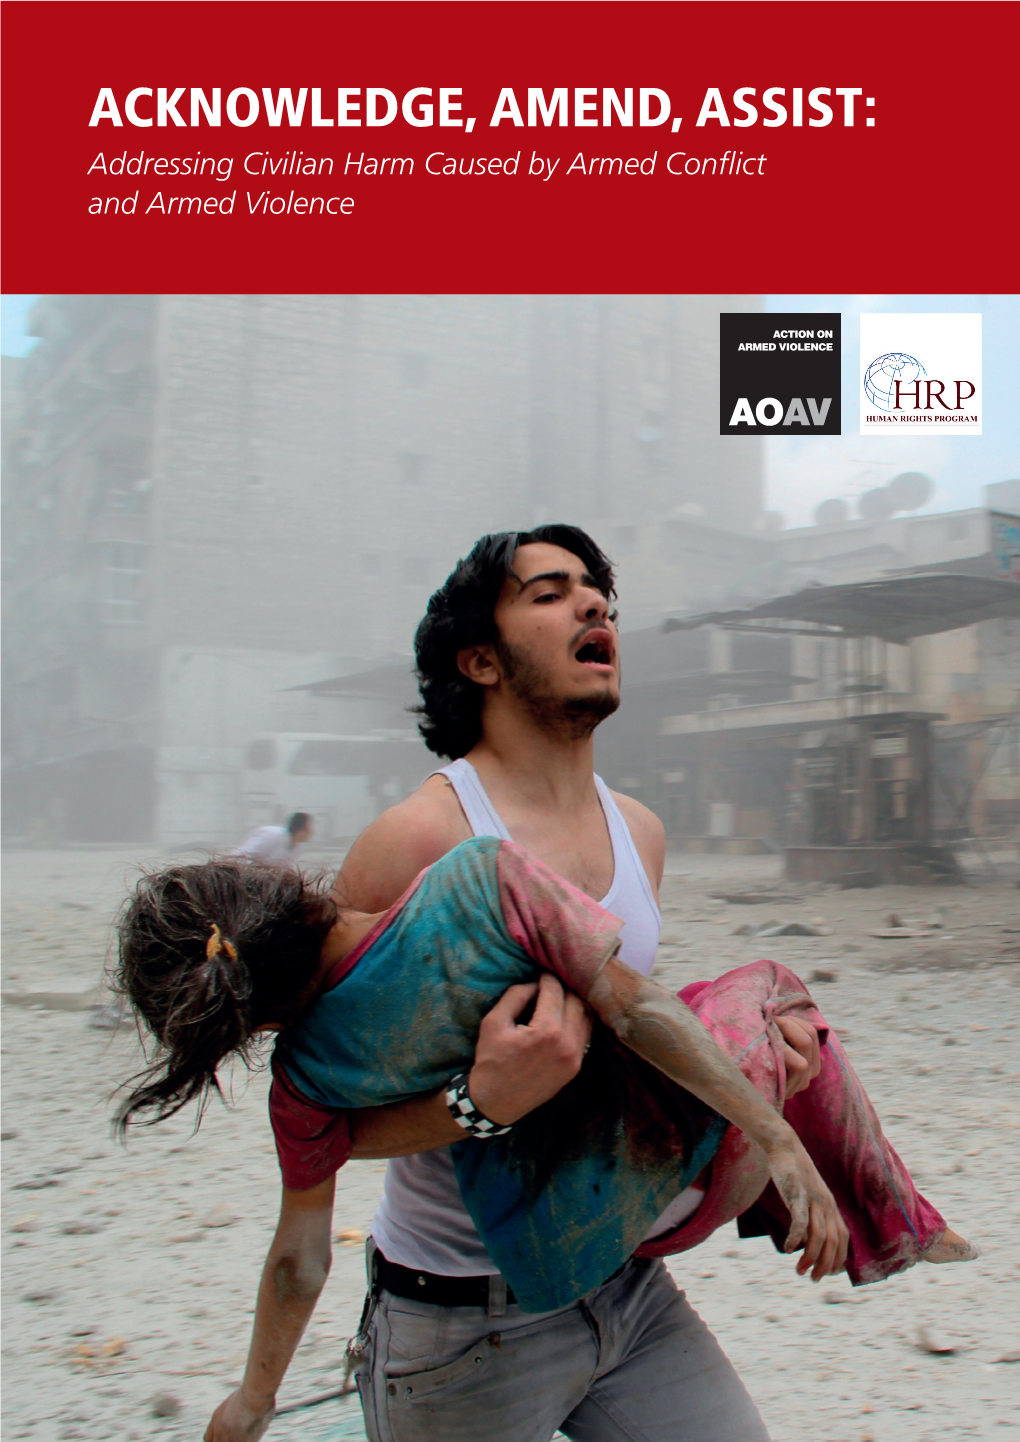 ACKNOWLEDGE, AMEND, ASSIST: Addressing Civilian Harm Caused by Armed Conflict and Armed Violence